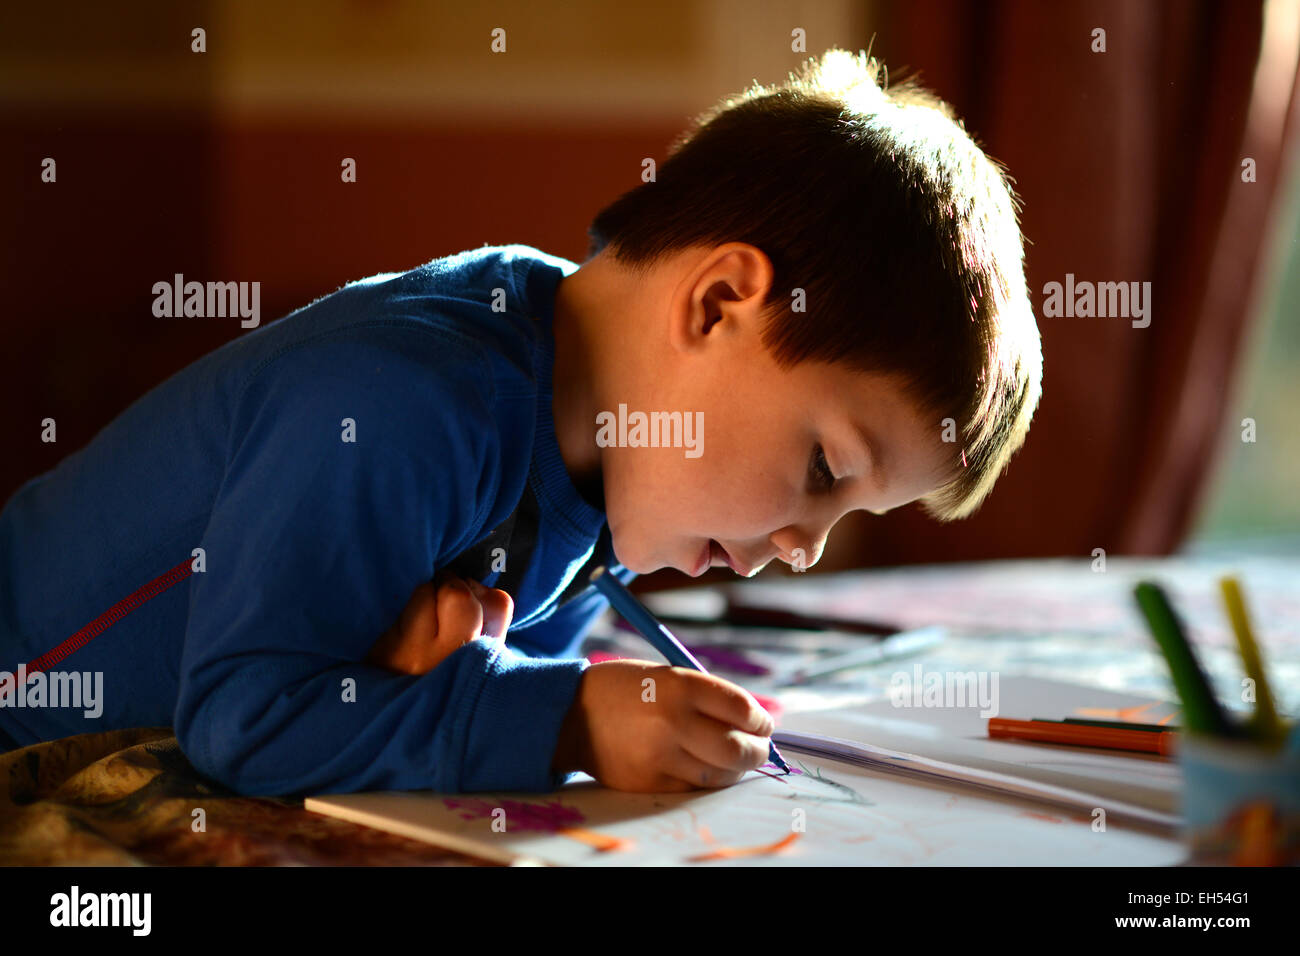 Young boy child children drawing painting writing concentrating uk Stock Photo